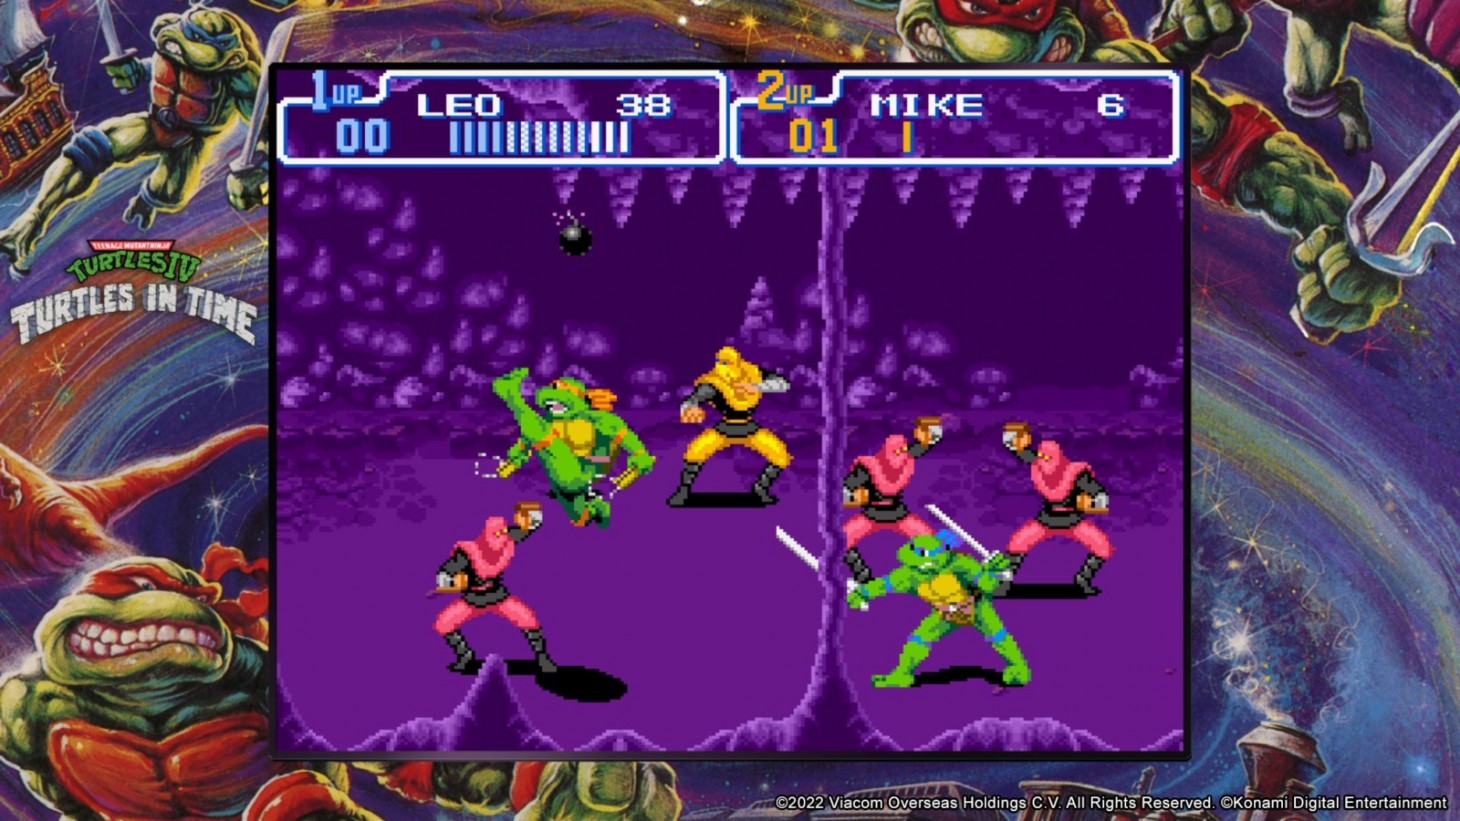 https://www.gameinformer.com/sites/default/files/styles/full/public/2022/07/21/11d6df6b/tmnt_turtles_in_times_cowabunga_collection.jpg